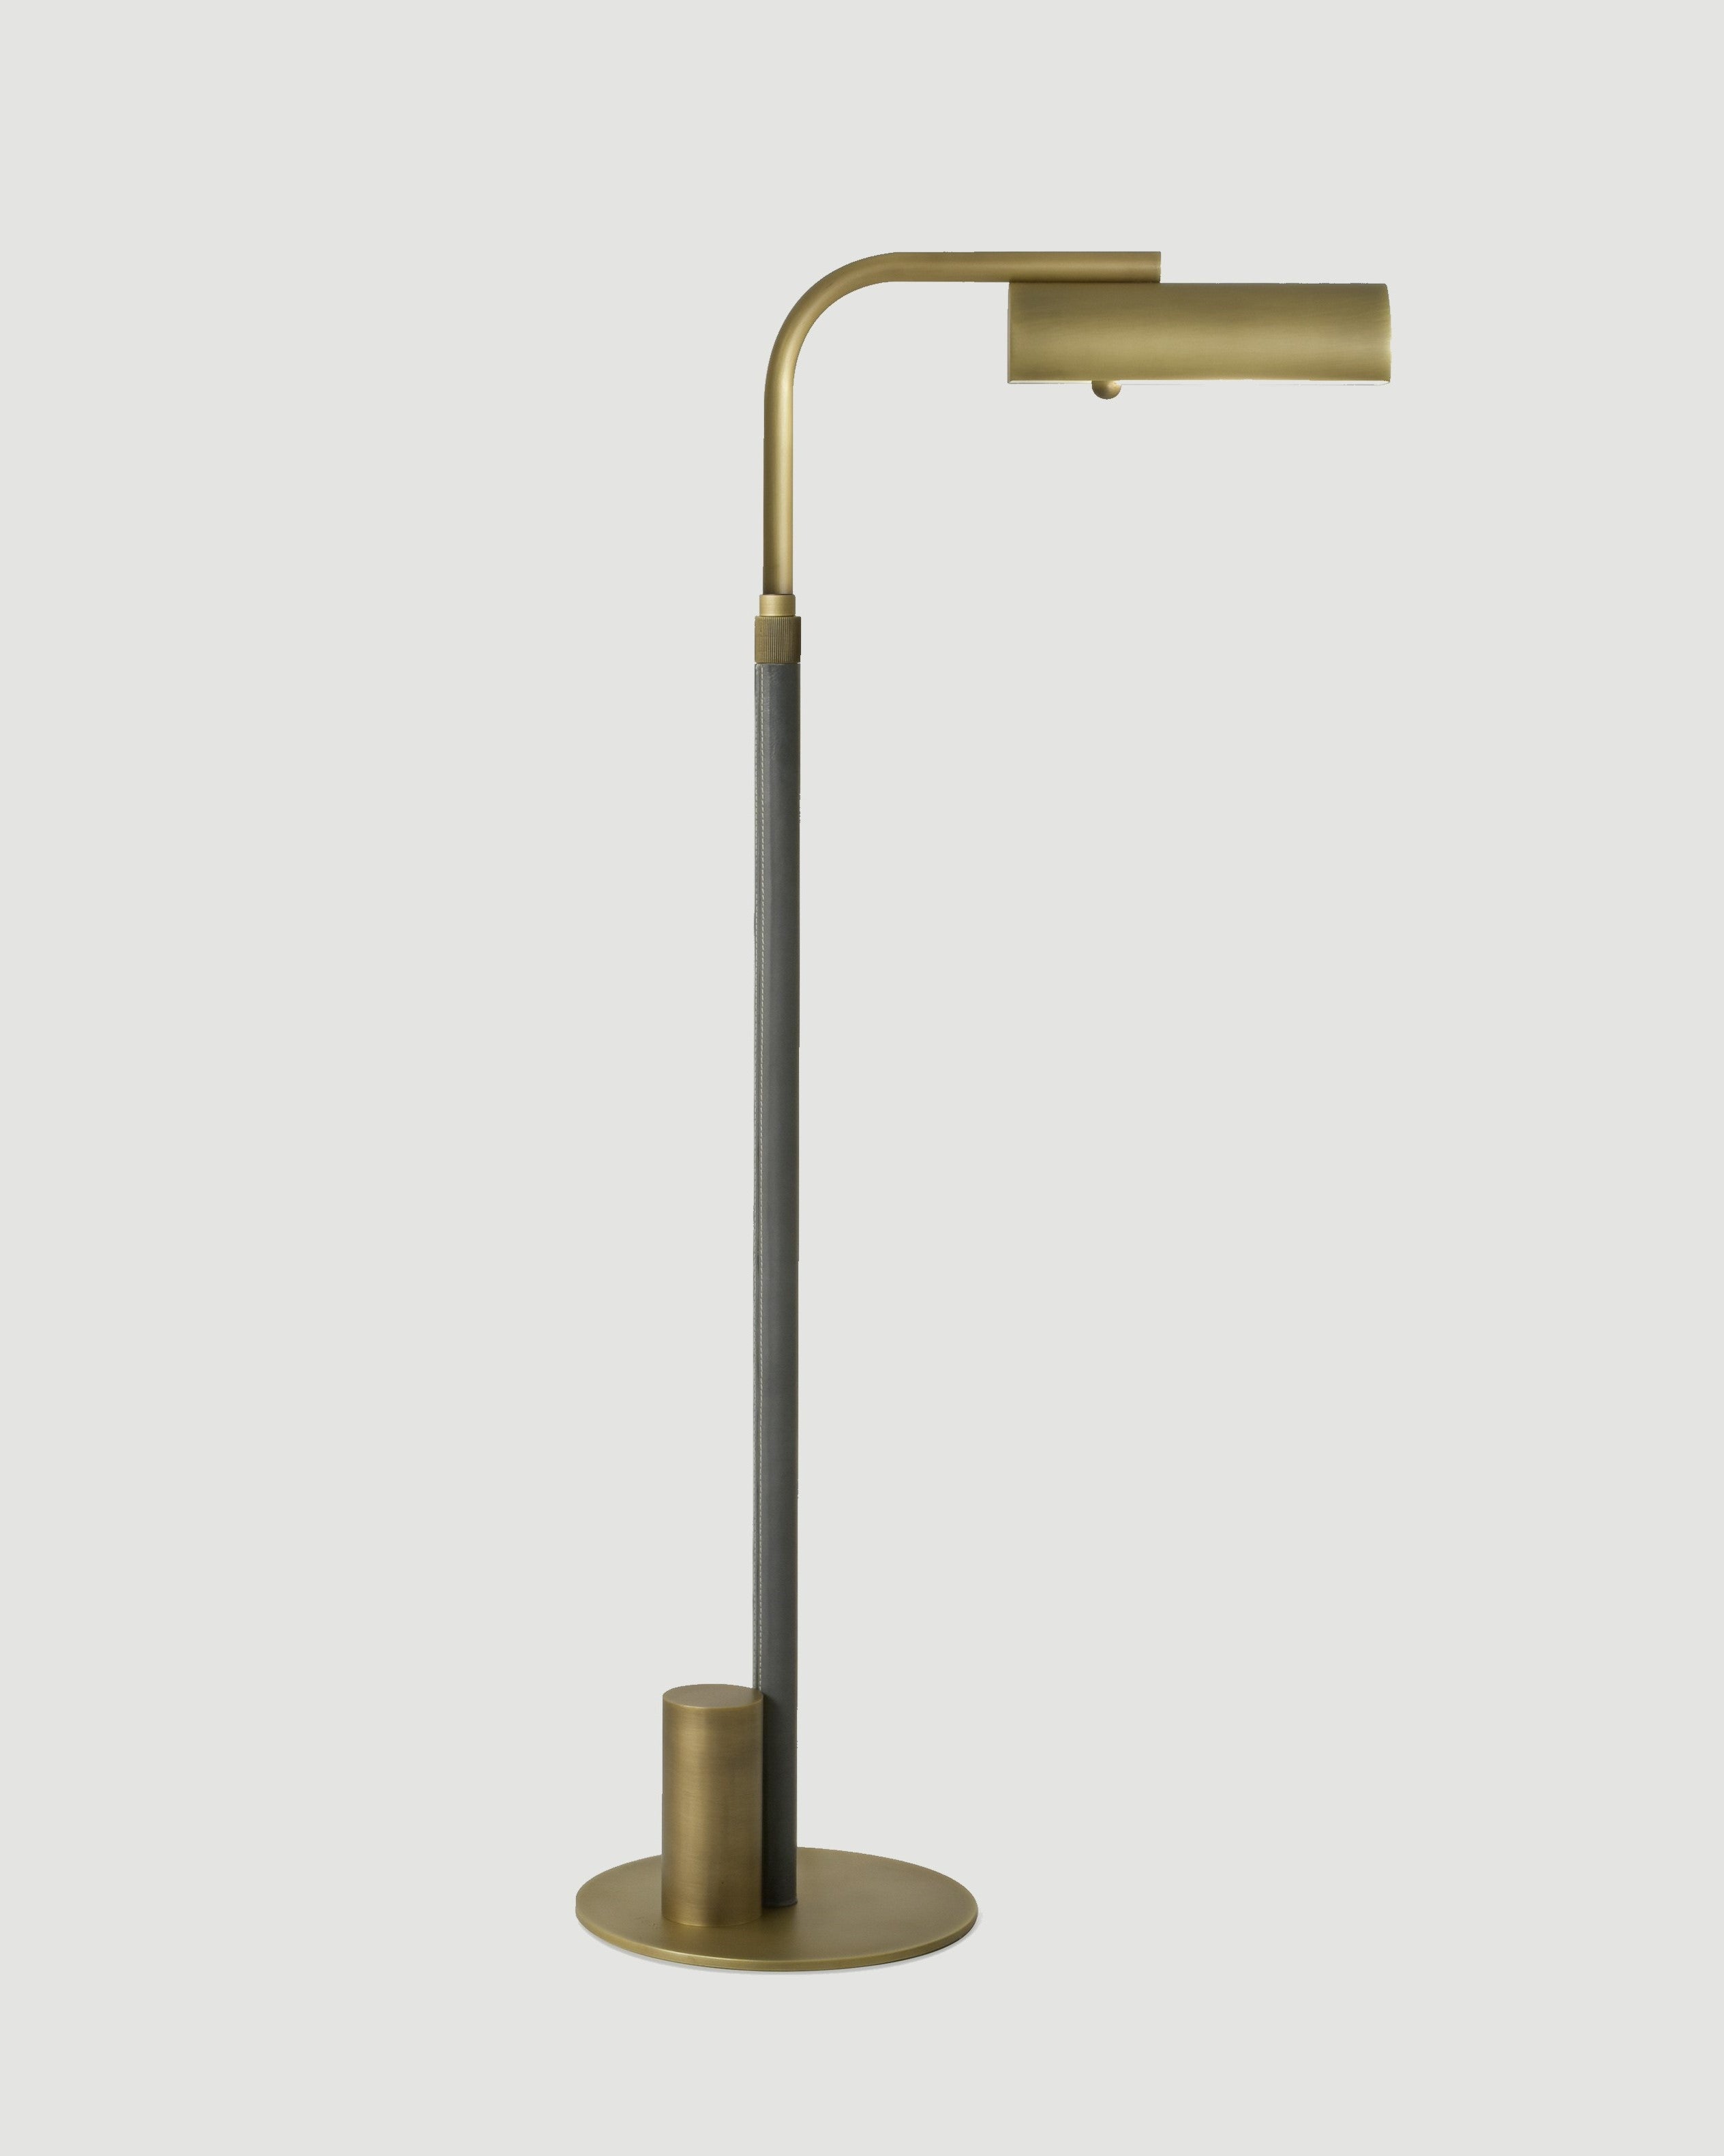 Light Antique Brass with Mink Leather